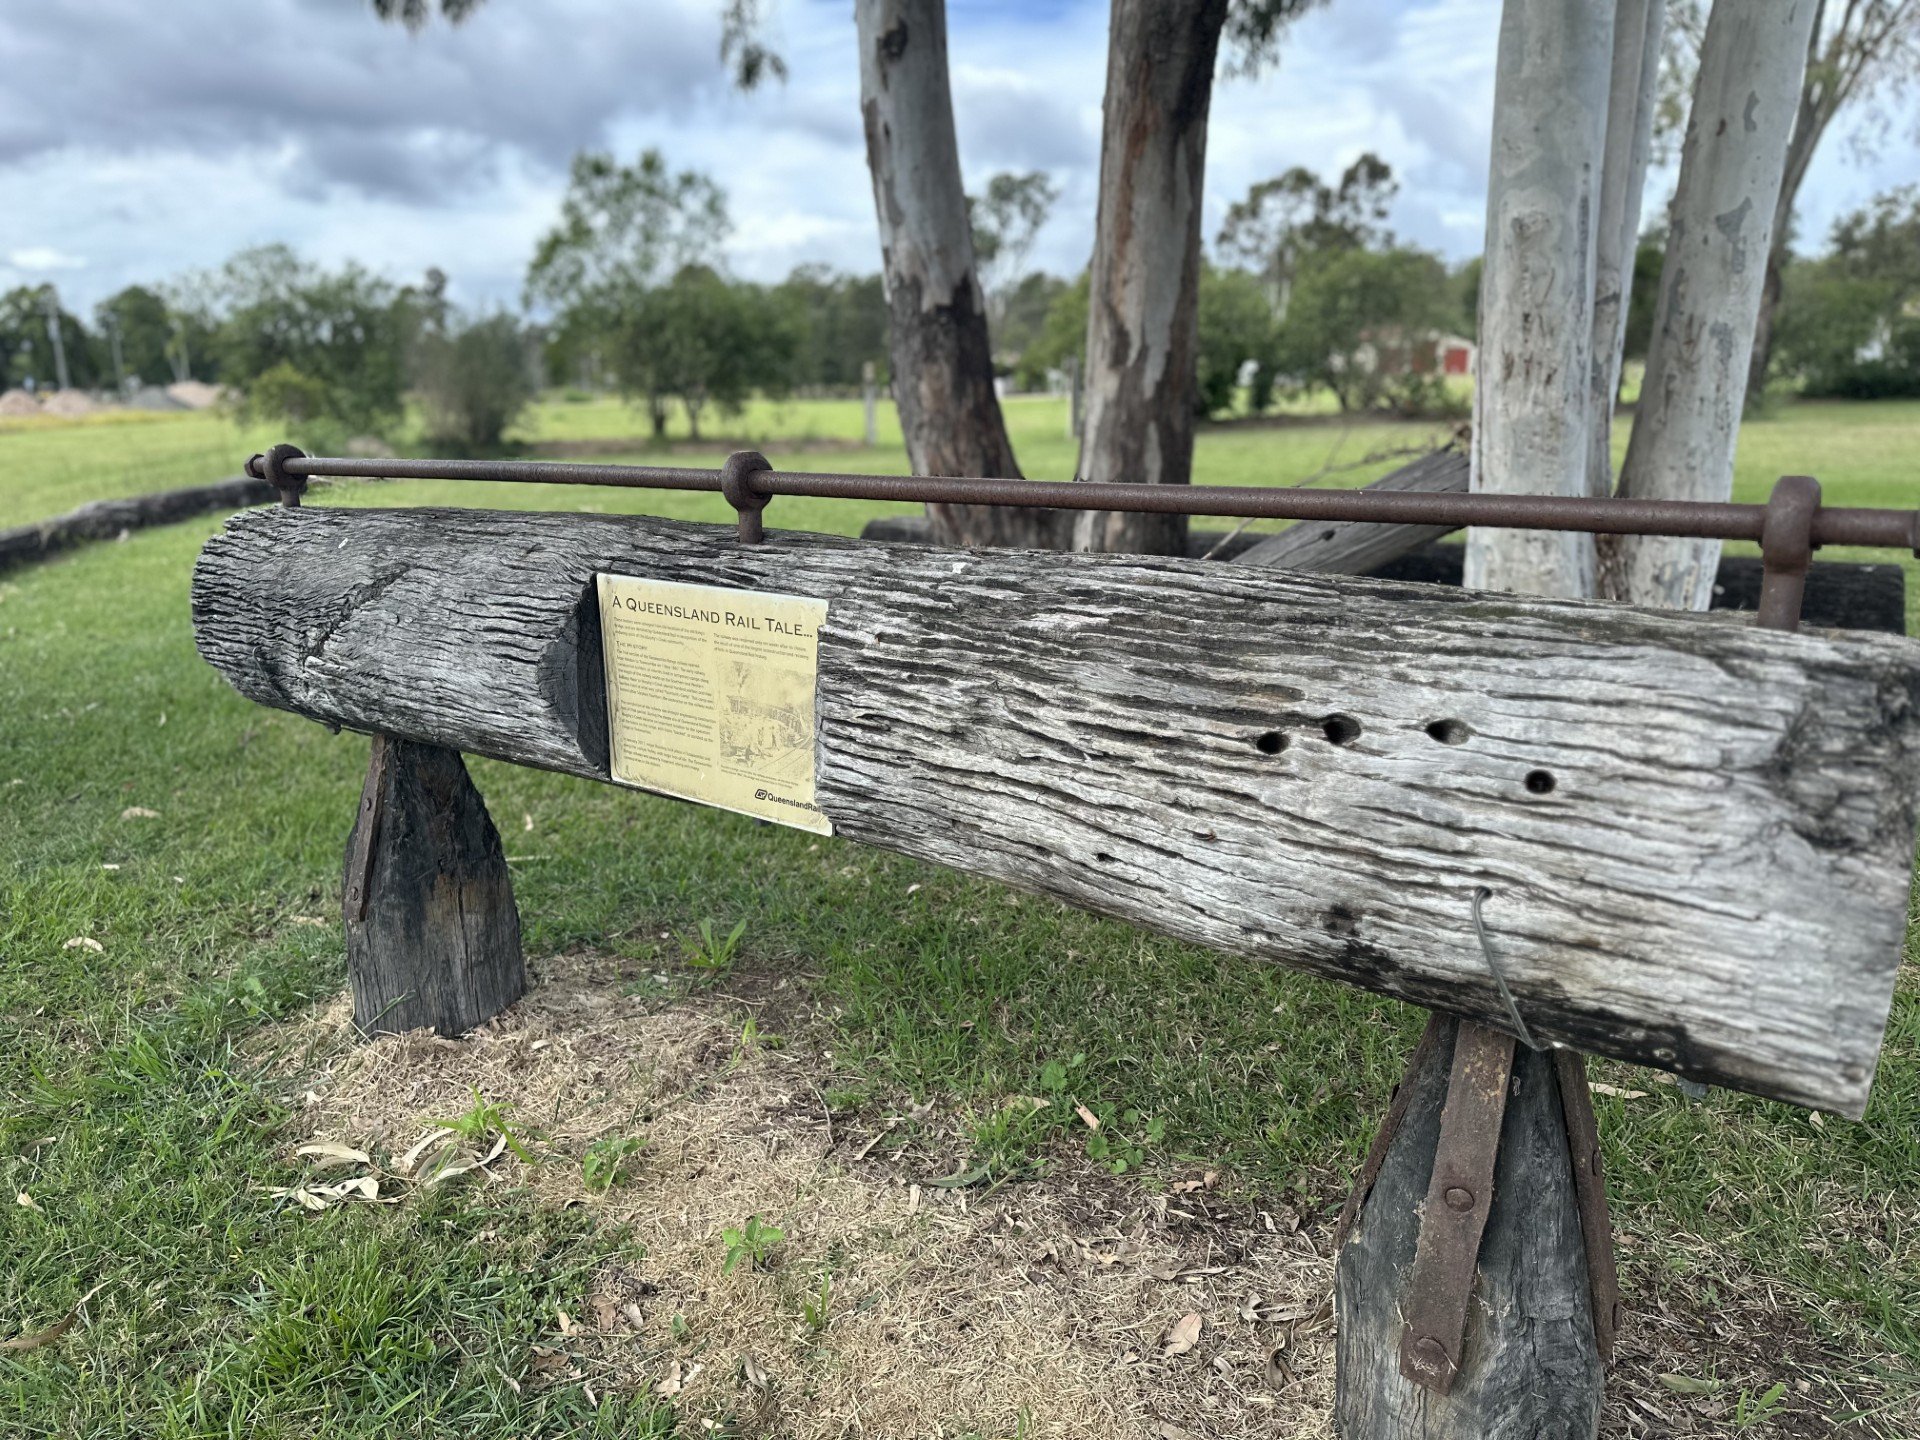 𝒟𝒾𝒹 𝓎𝑜𝓊 𝓀𝓃𝑜𝓌... Murphys Creek has a proud railway history? Out the back of the Tavern, you'll find a monument to the Queensland Rail Tale which tells the story of the construction, destruction and ultimate recovery of the Toowoomba Range Ra